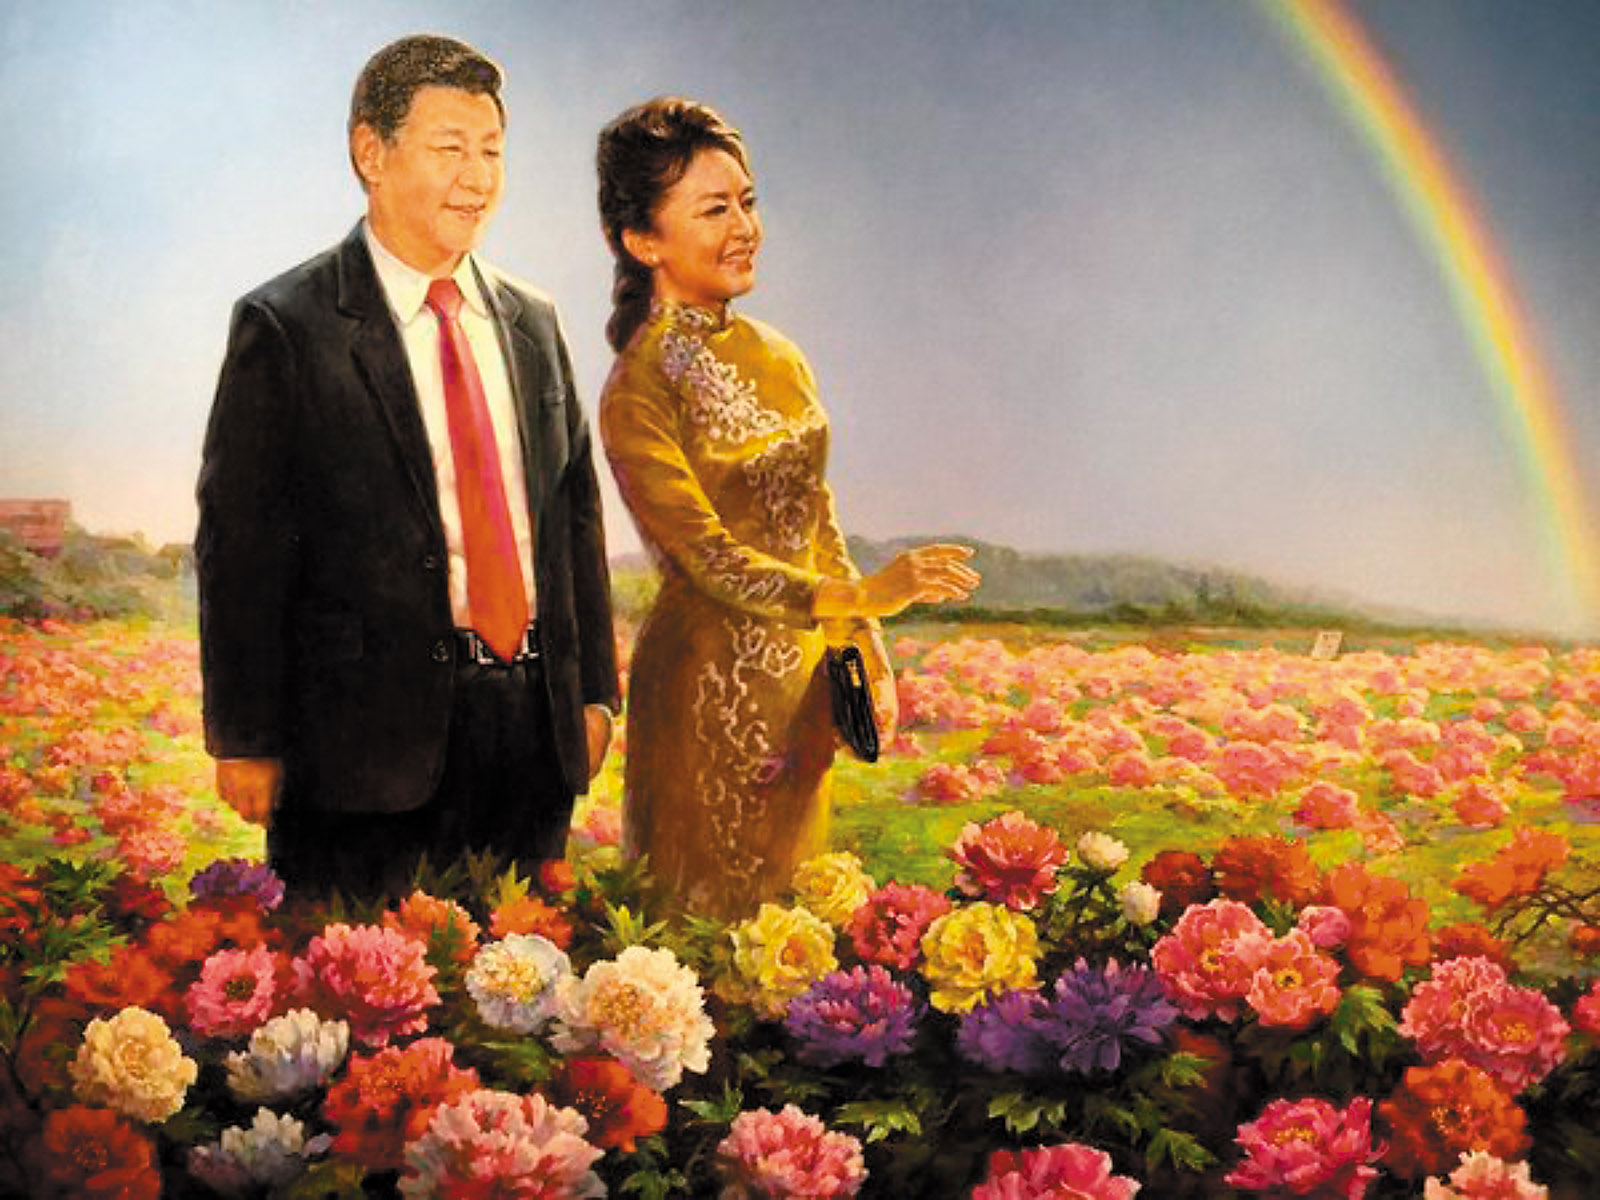 Chinese President Xi Jinping and his wife Peng Liyuan in a painting that has been circulating on the Internet